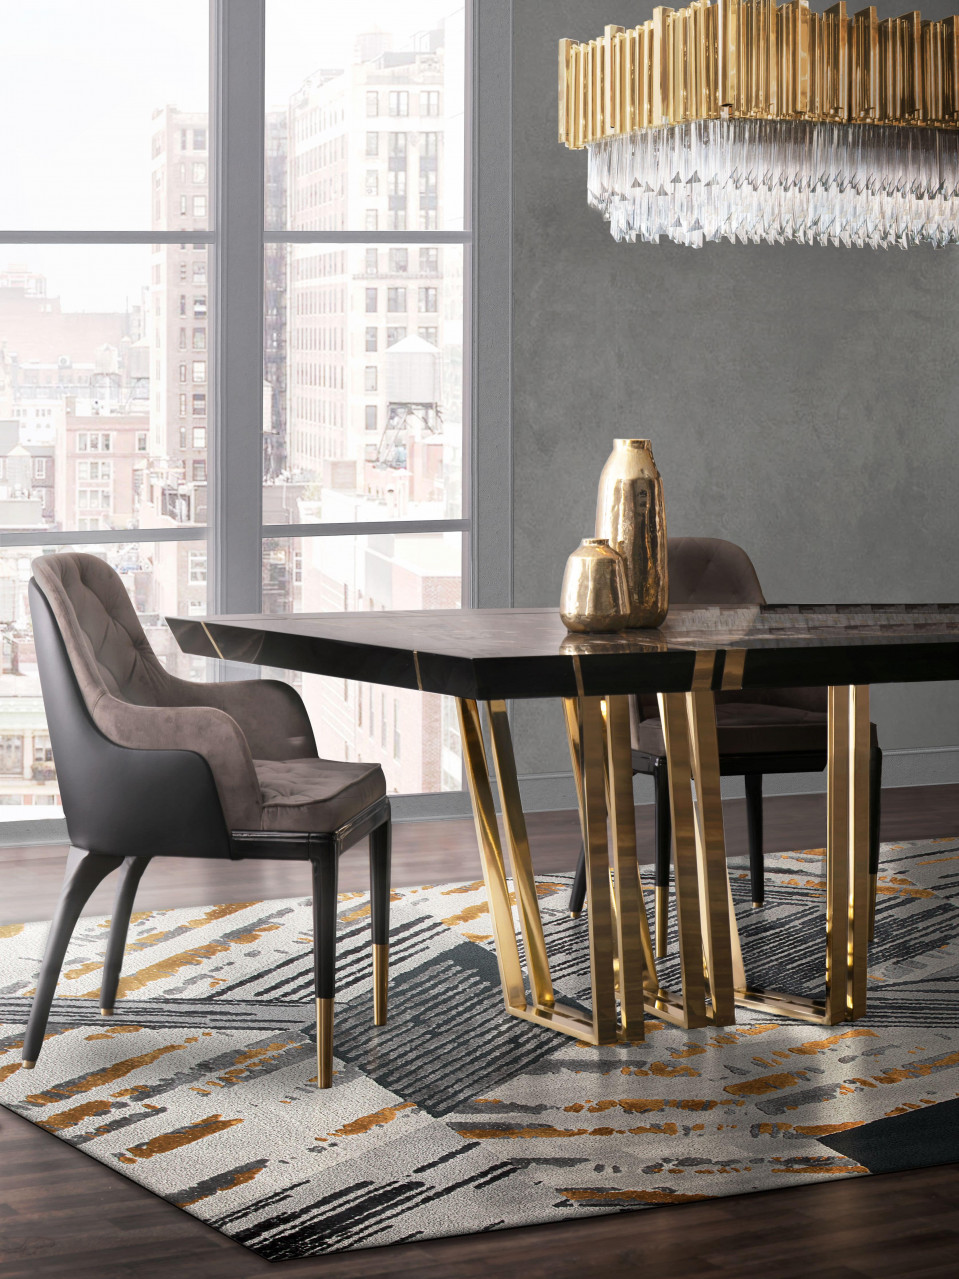 Modern Dining room design with gold details and the Xisto Rug home inspiration ideas